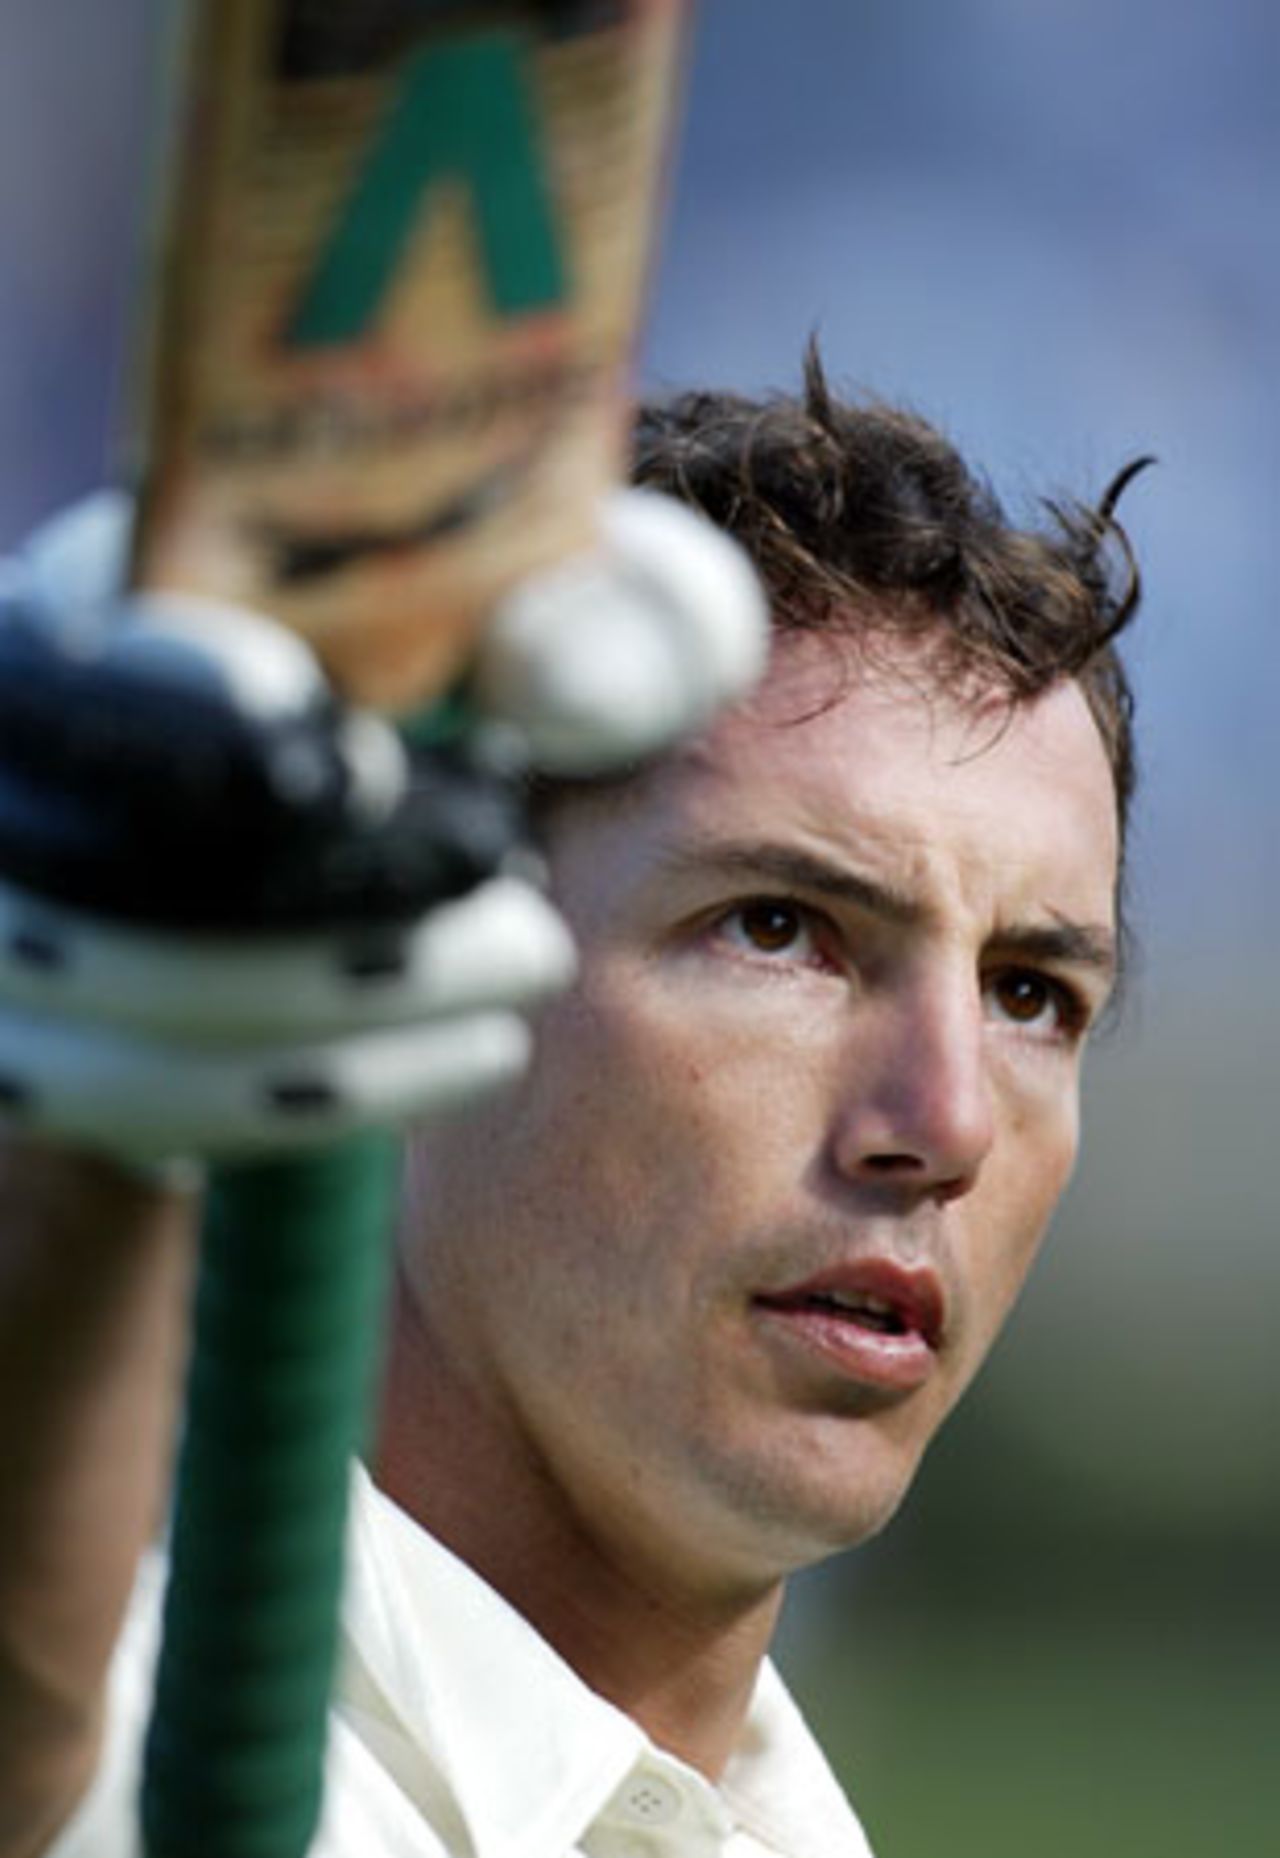 New Zealand batsman Adam Parore raises his bat to acknowledge the crowd after being dismissed in his last Test innings. Parore scored 36 in the second innings of his 78th Test. 3rd Test: New Zealand v England at Eden Park, Auckland, 30 March-3 April 2002 (2 April 2002).